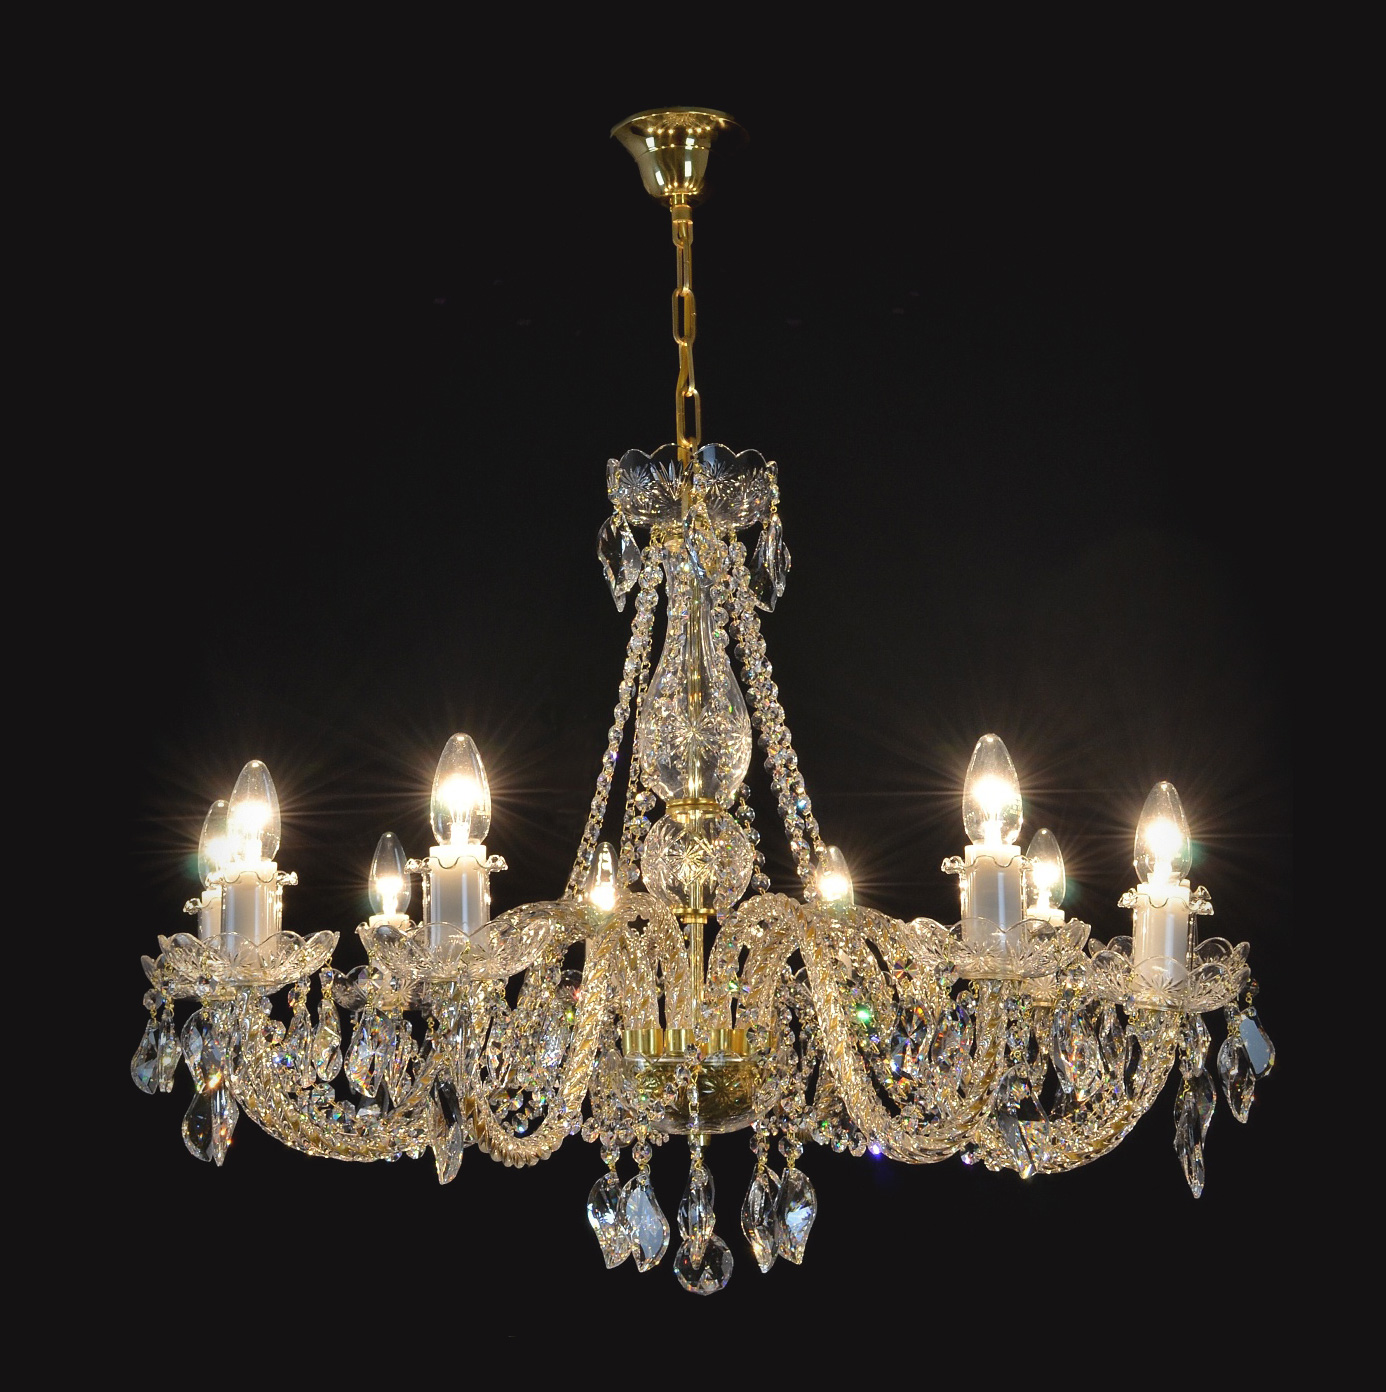 Charm crystal chandelier — WRANOVSKY - Bohemian Crystal Chandeliers  Manufacturer